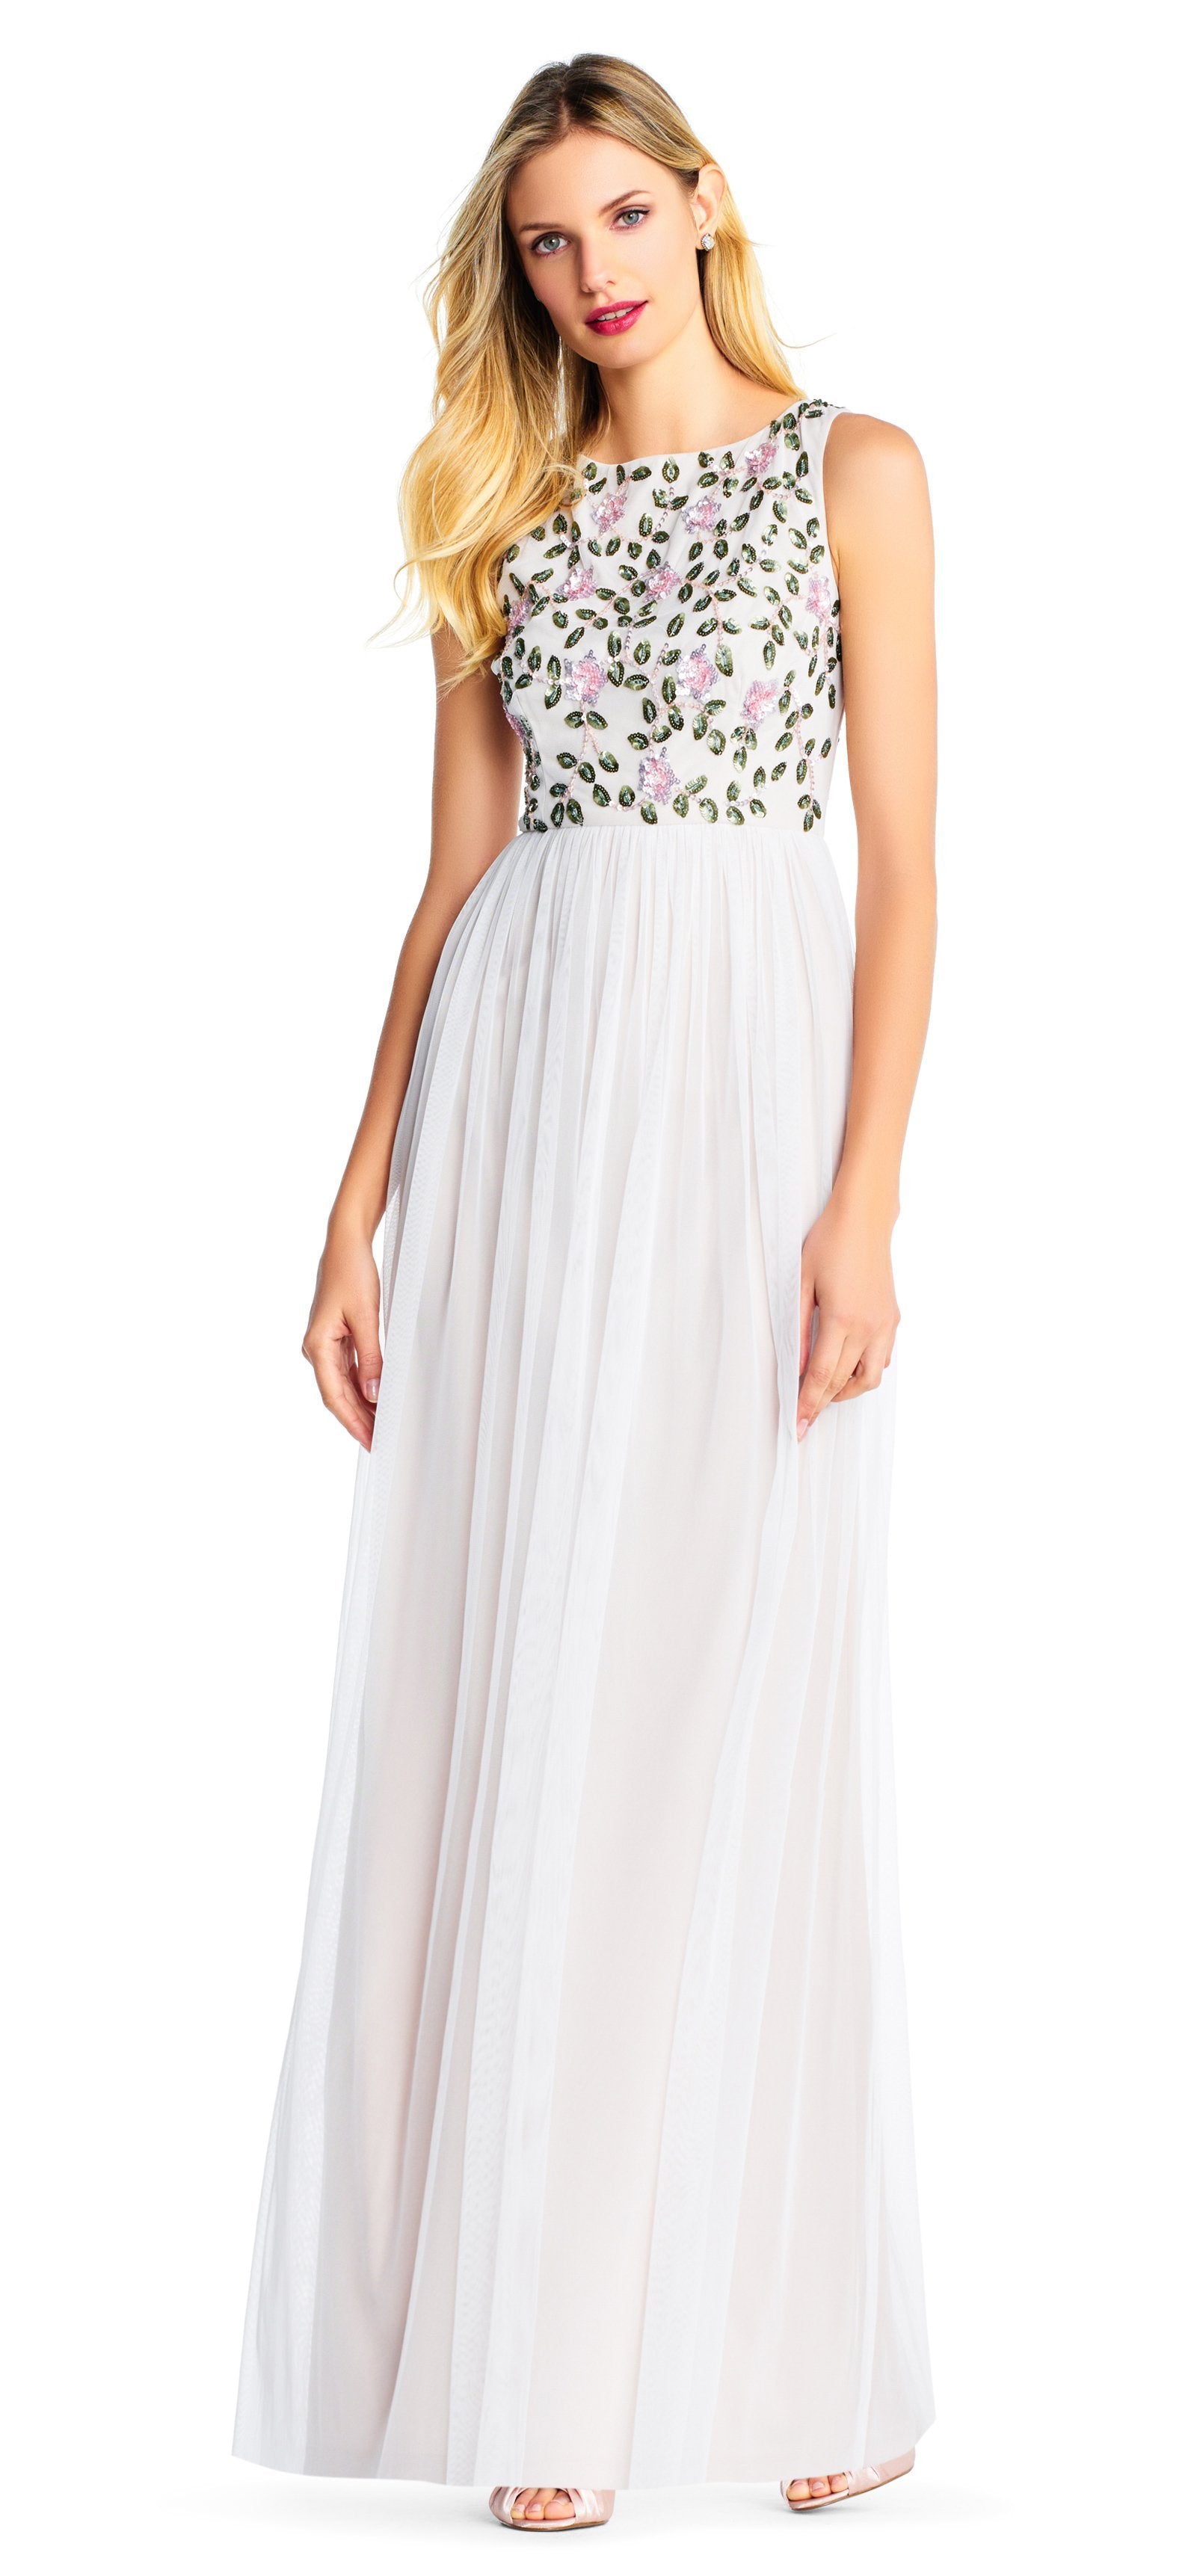 Image of Adrianna Papell - AP1E203409 Bedazzled Bateau Mesh A-line Dress